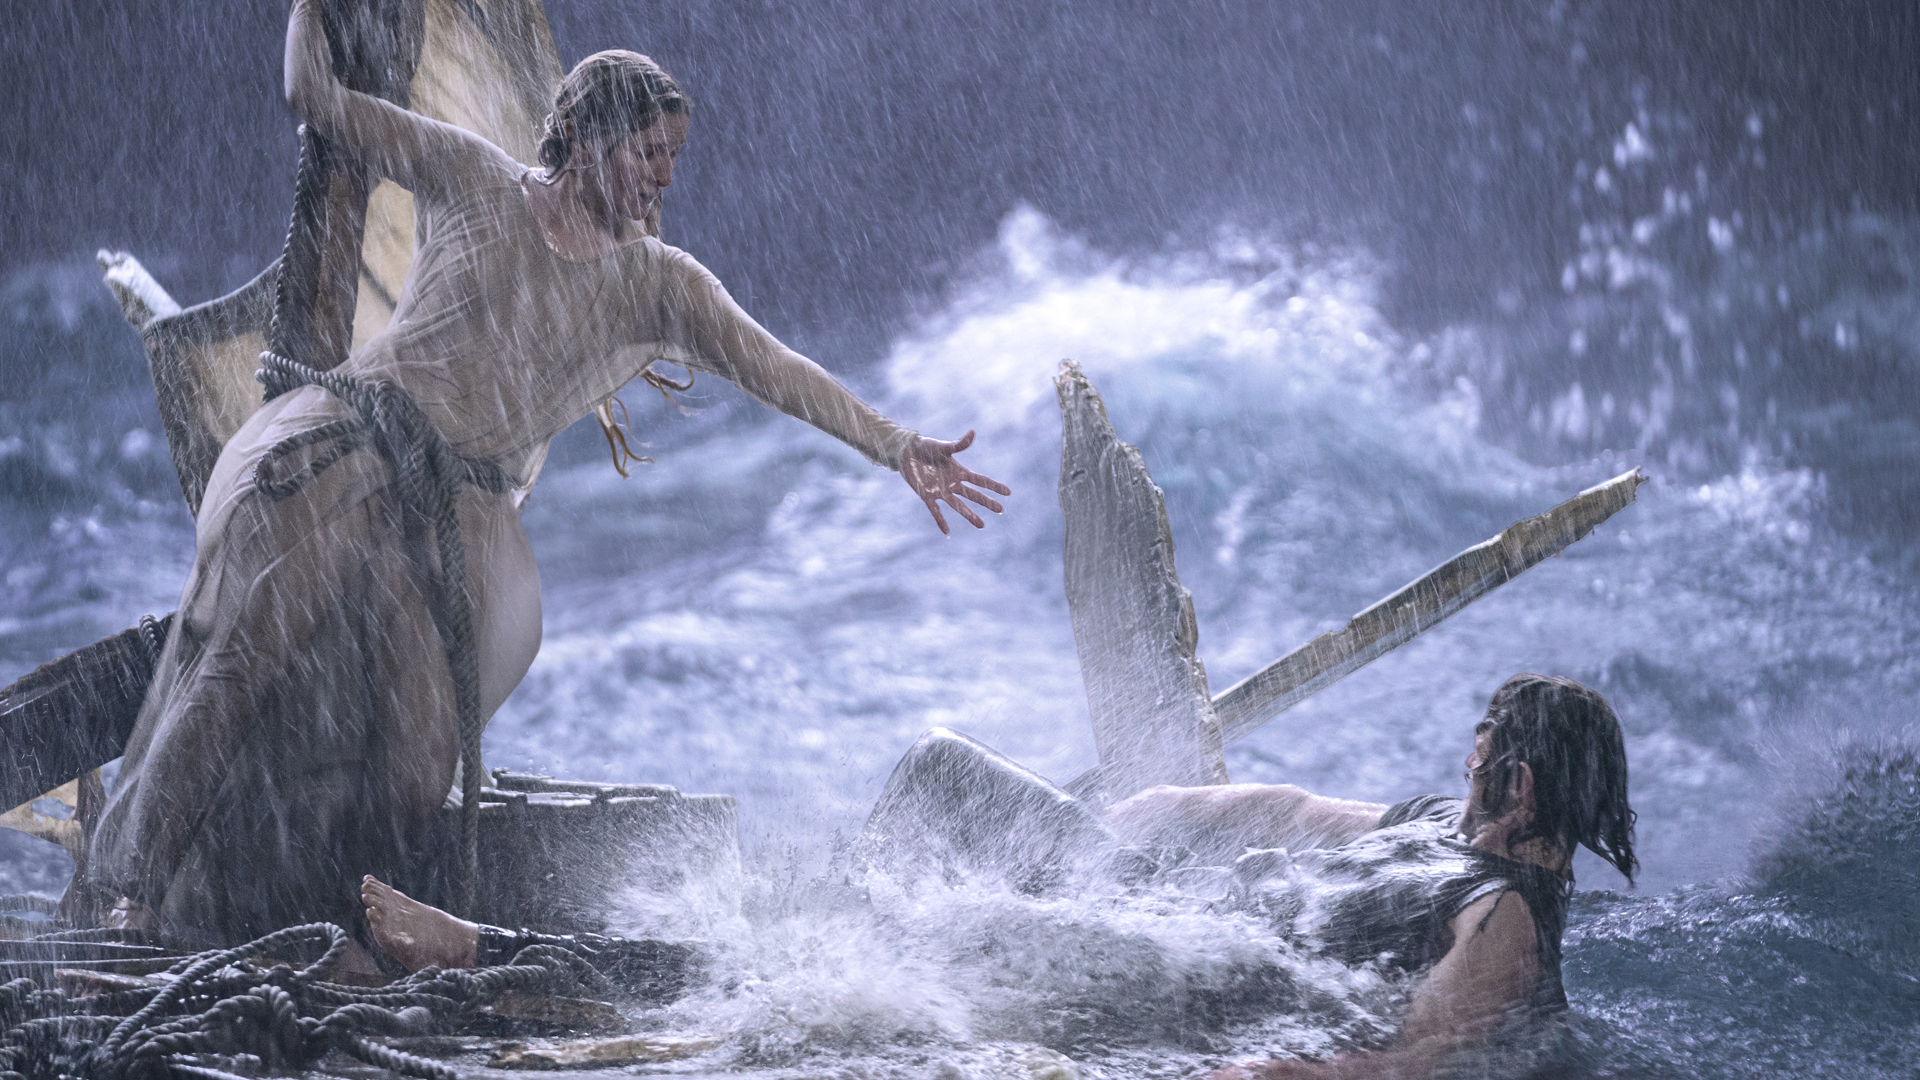 Morfydd Clark's Galadriel tries to help Charlie Vickers' Halbrand during a storm in The Rings of Power on Prime Video